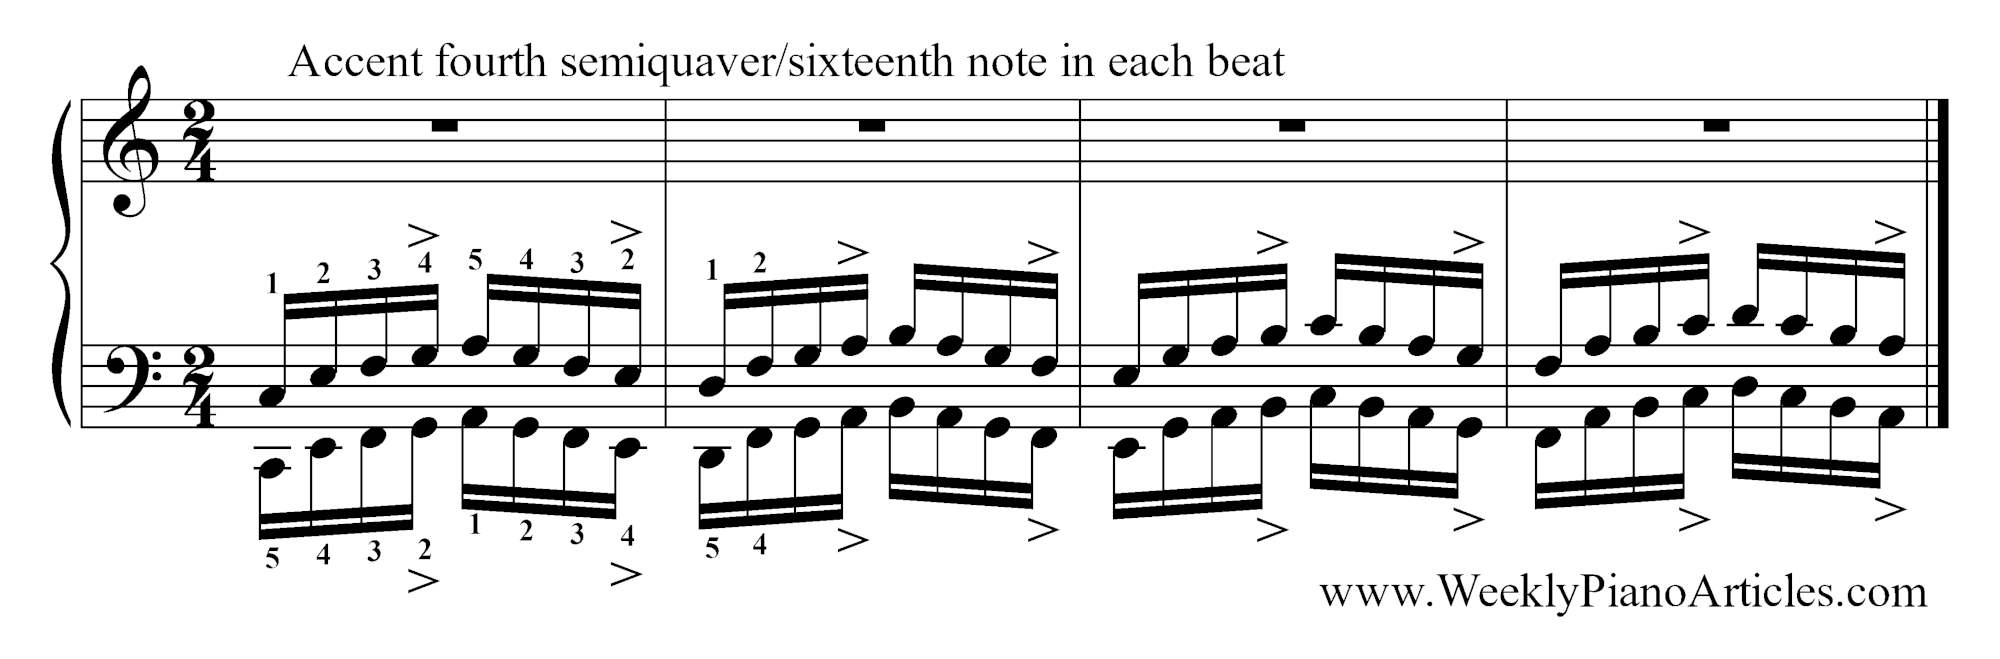 Hanon-Exercise-accent-fourth-semiquaver_sixteenth-note-in-each-beat